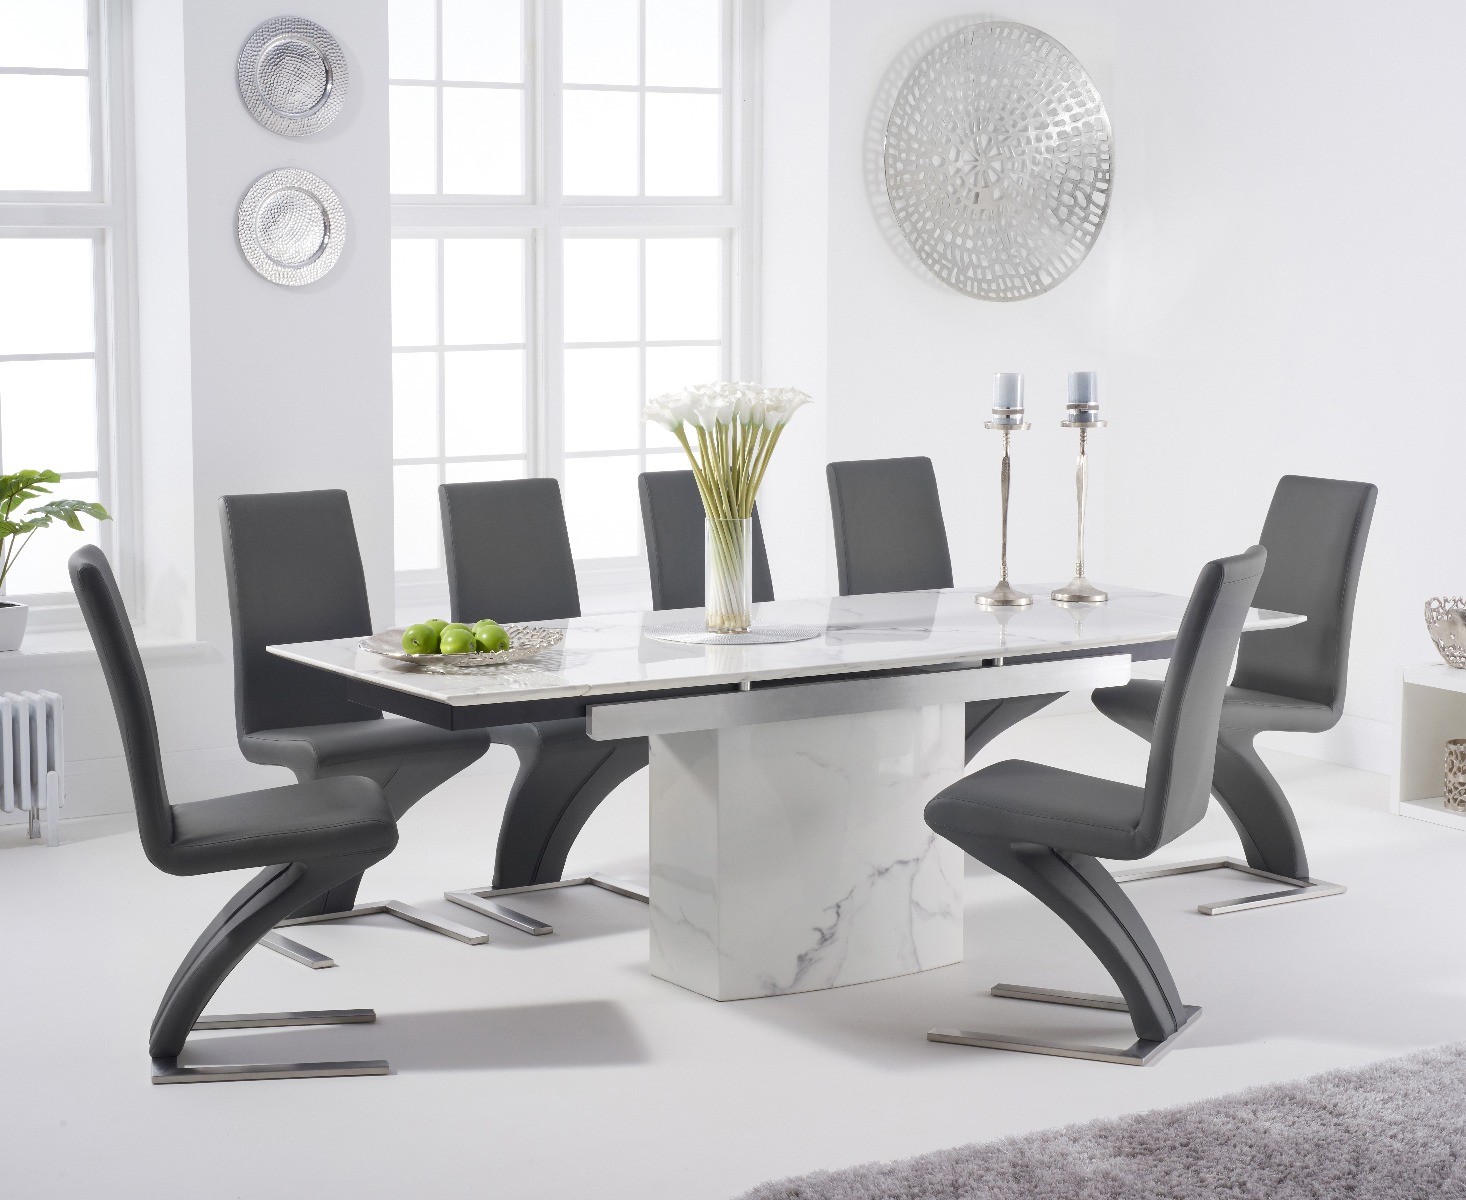 Photo 2 of Extending savona 160cm white marble dining table with 6 black aldo chairs